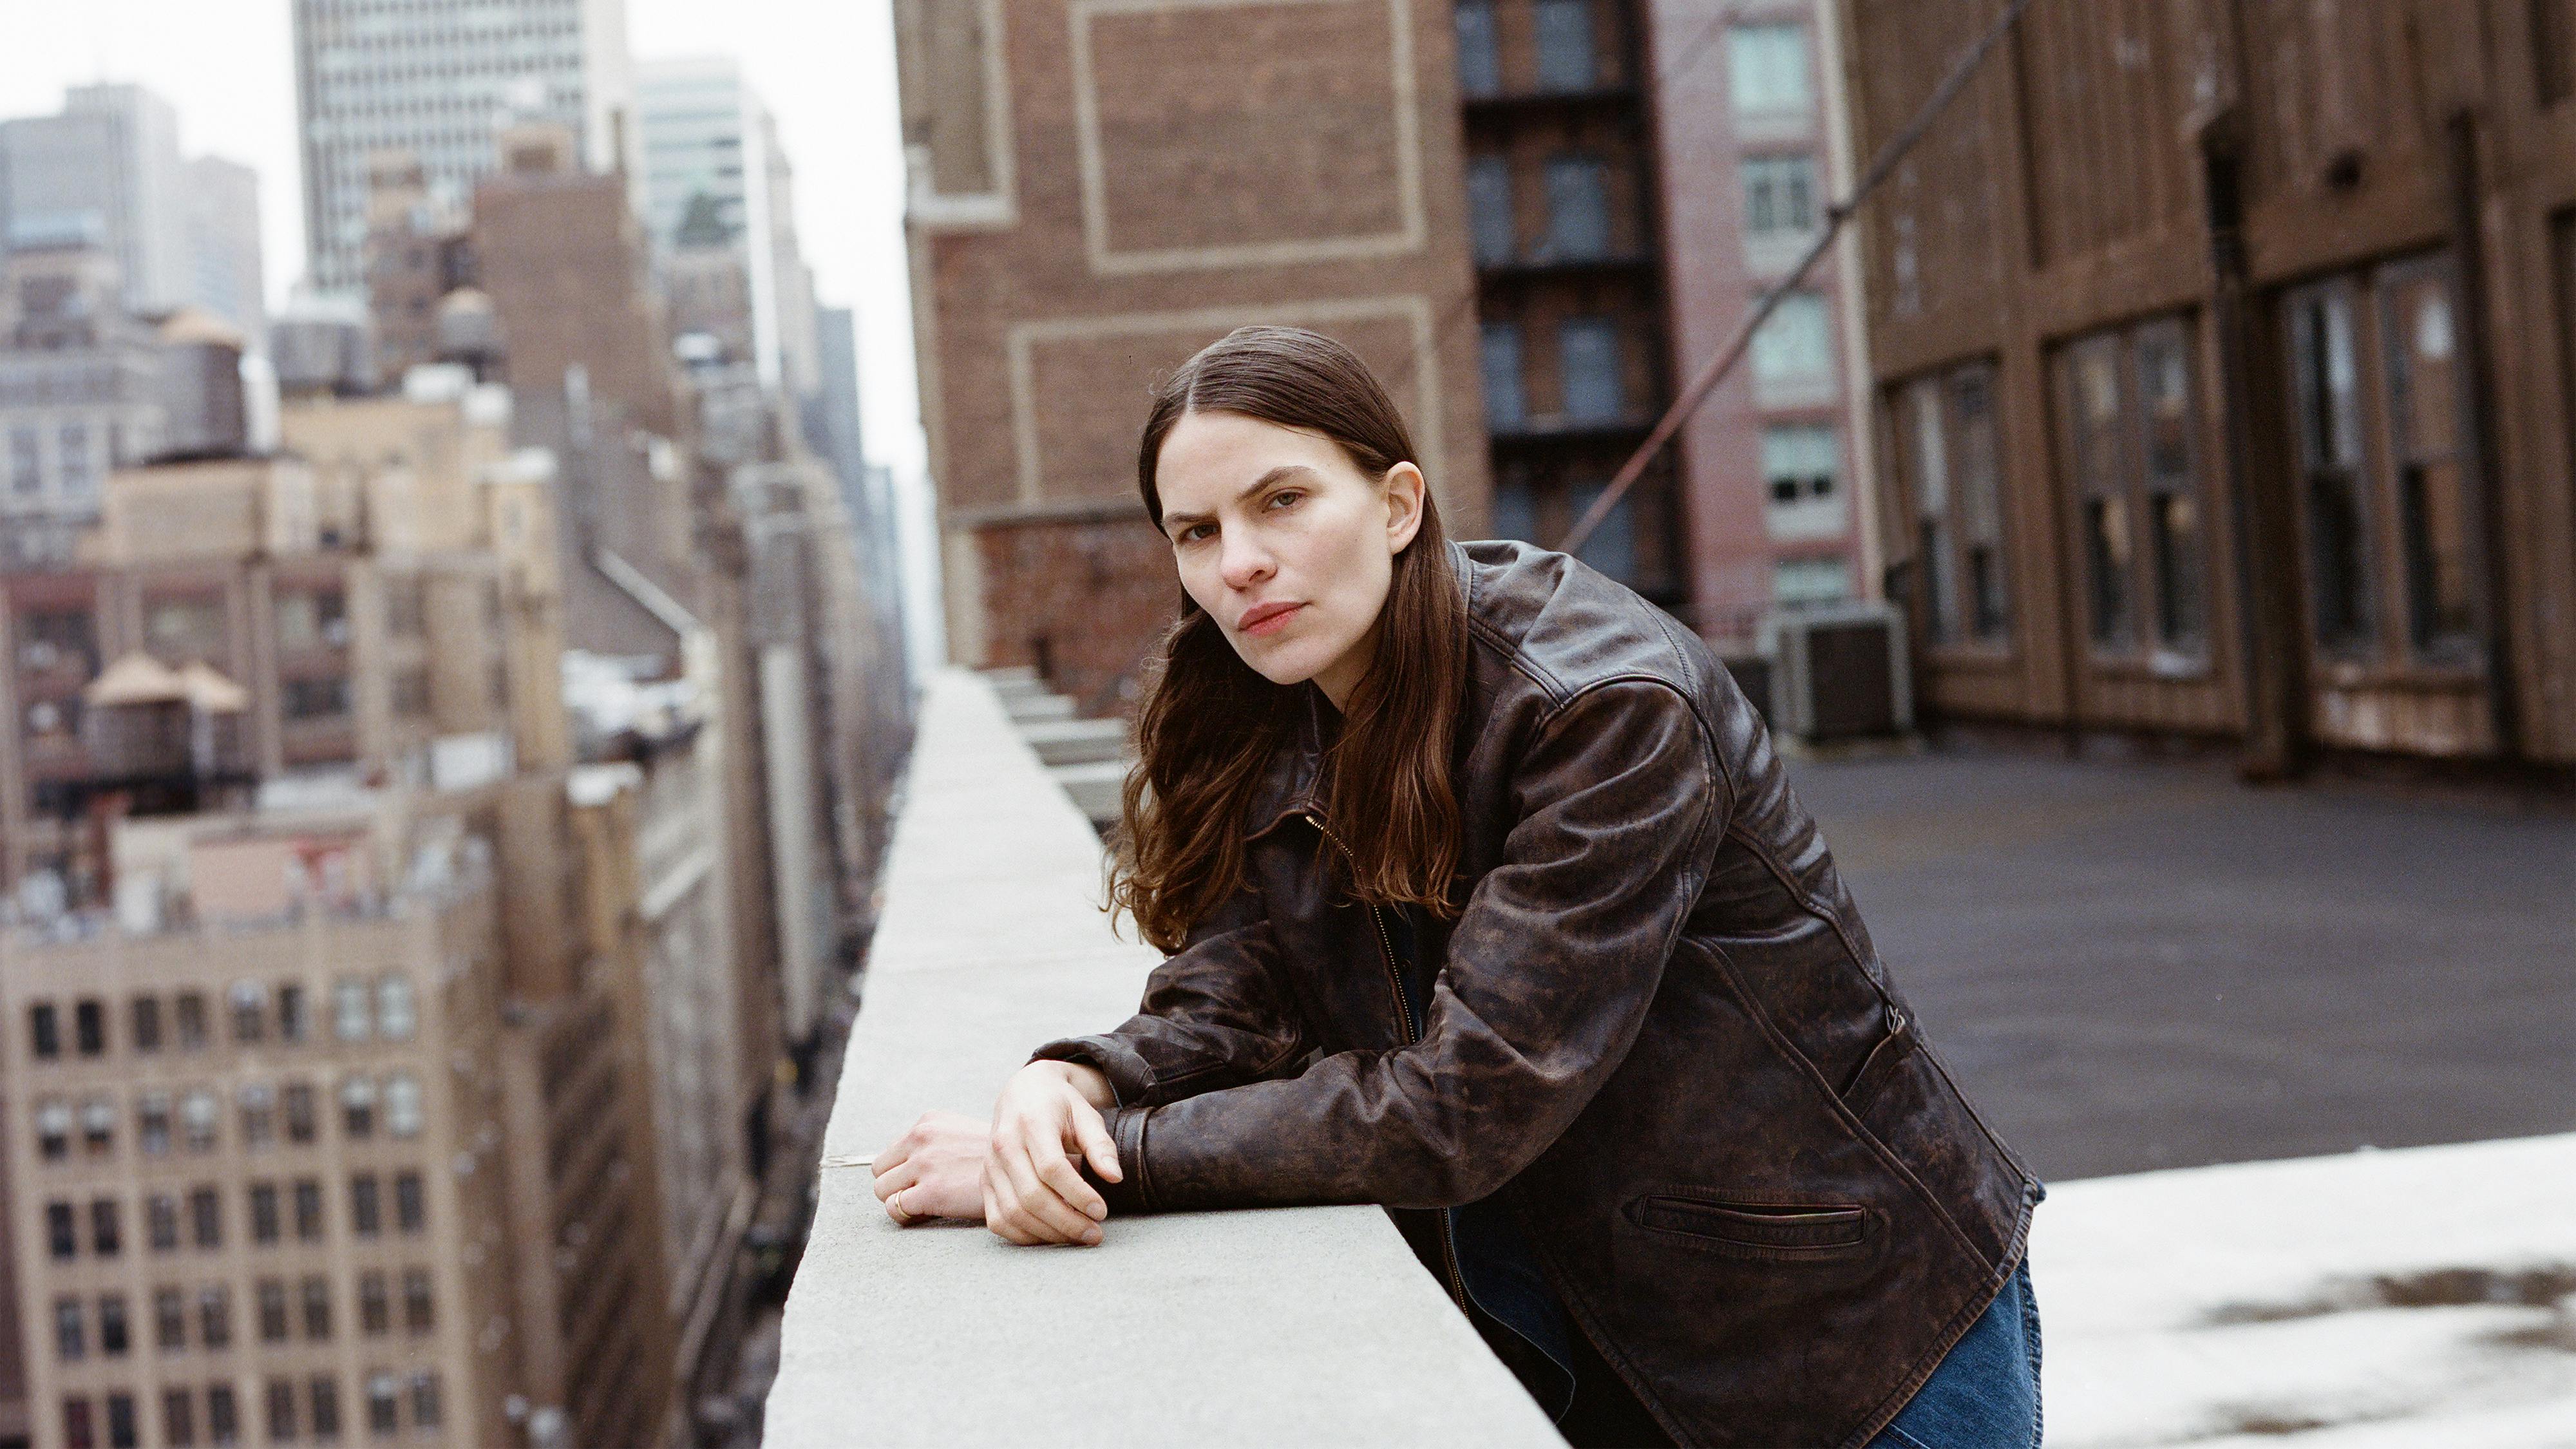 Eliot Sumner wears a brown leather jacket and leans on a roof wall overlooking New York City.